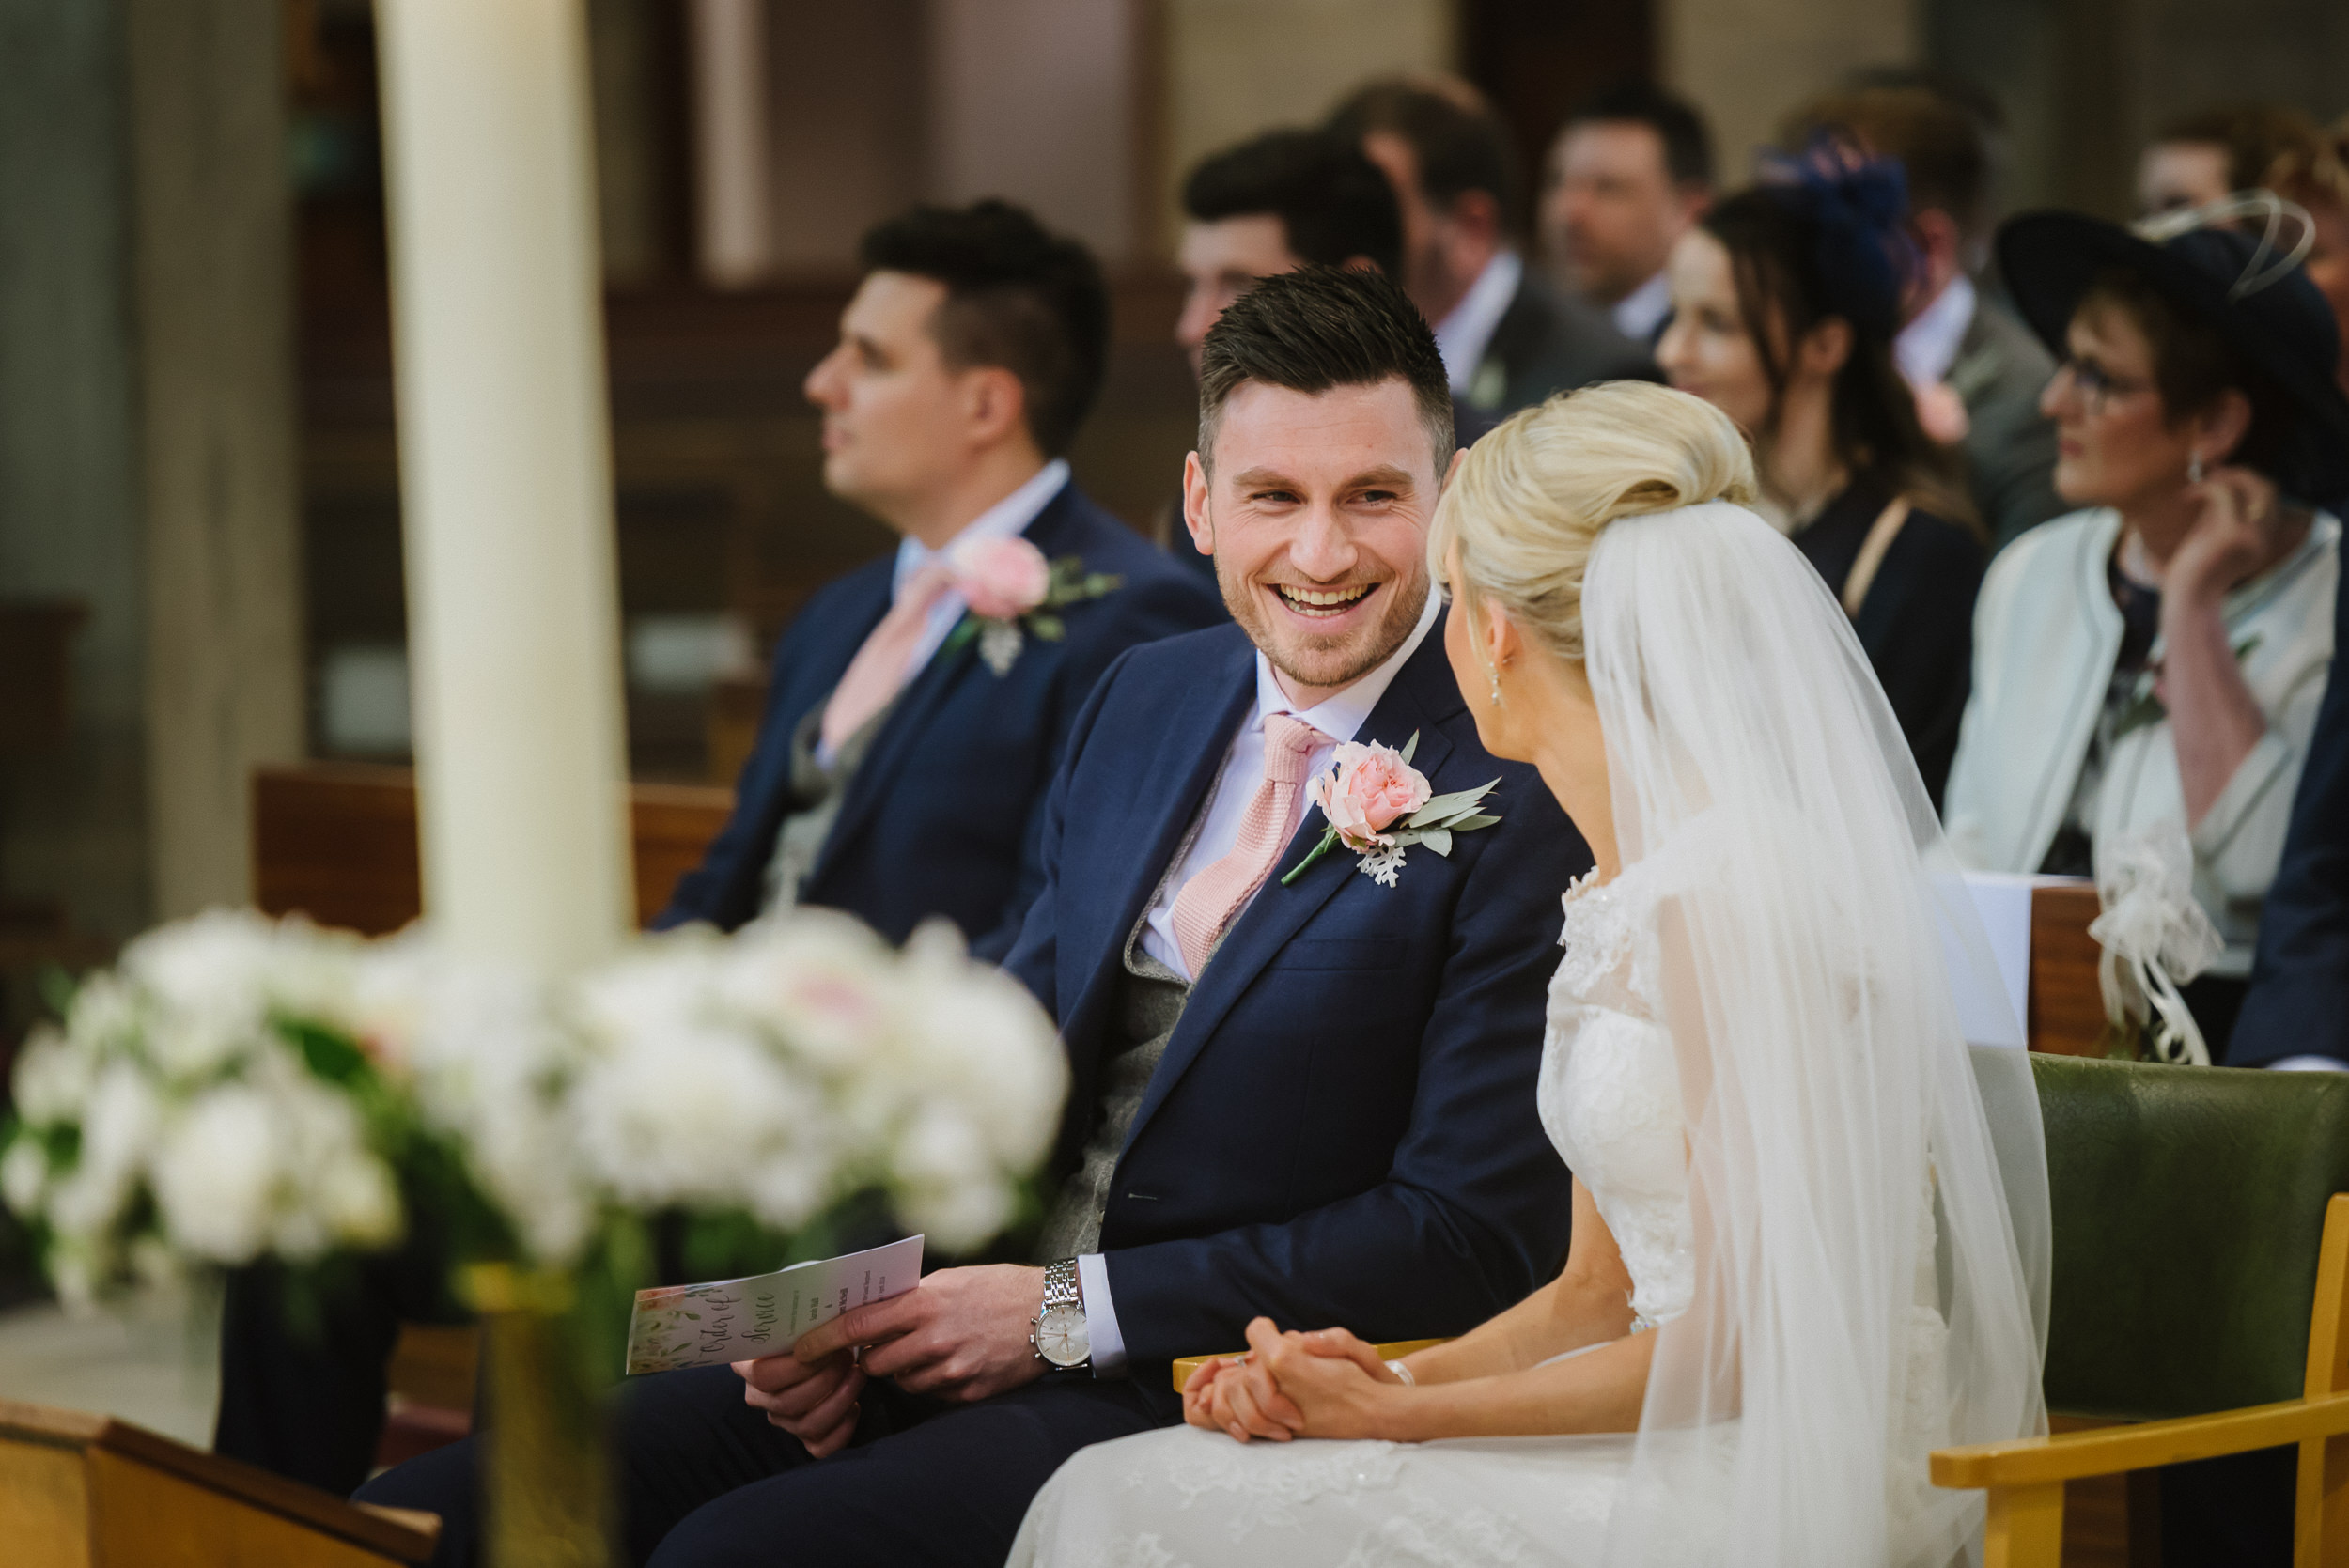 Bride and groom during their wedding ceremony at the Good Shepherd Church in Woodthorpe, Nottingham